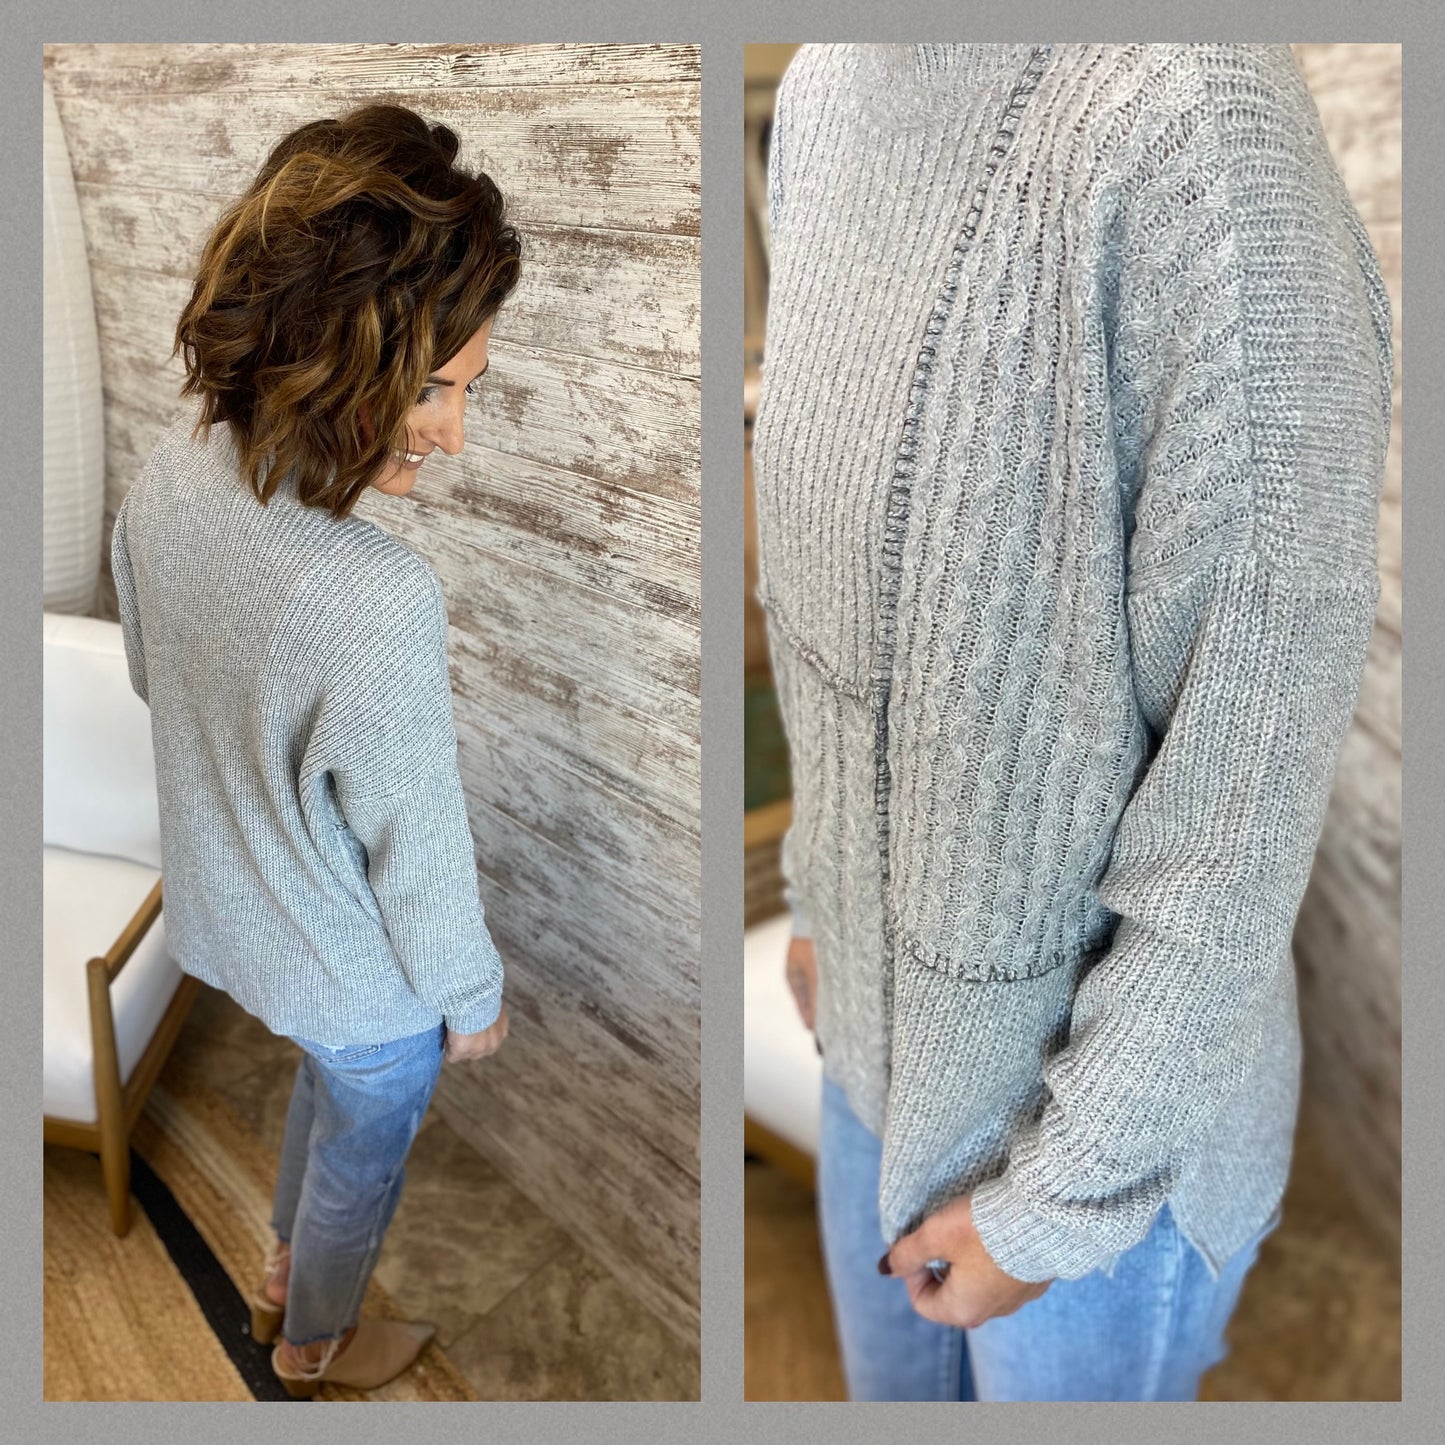 Contrast Stitch/Cable Knit Sweater